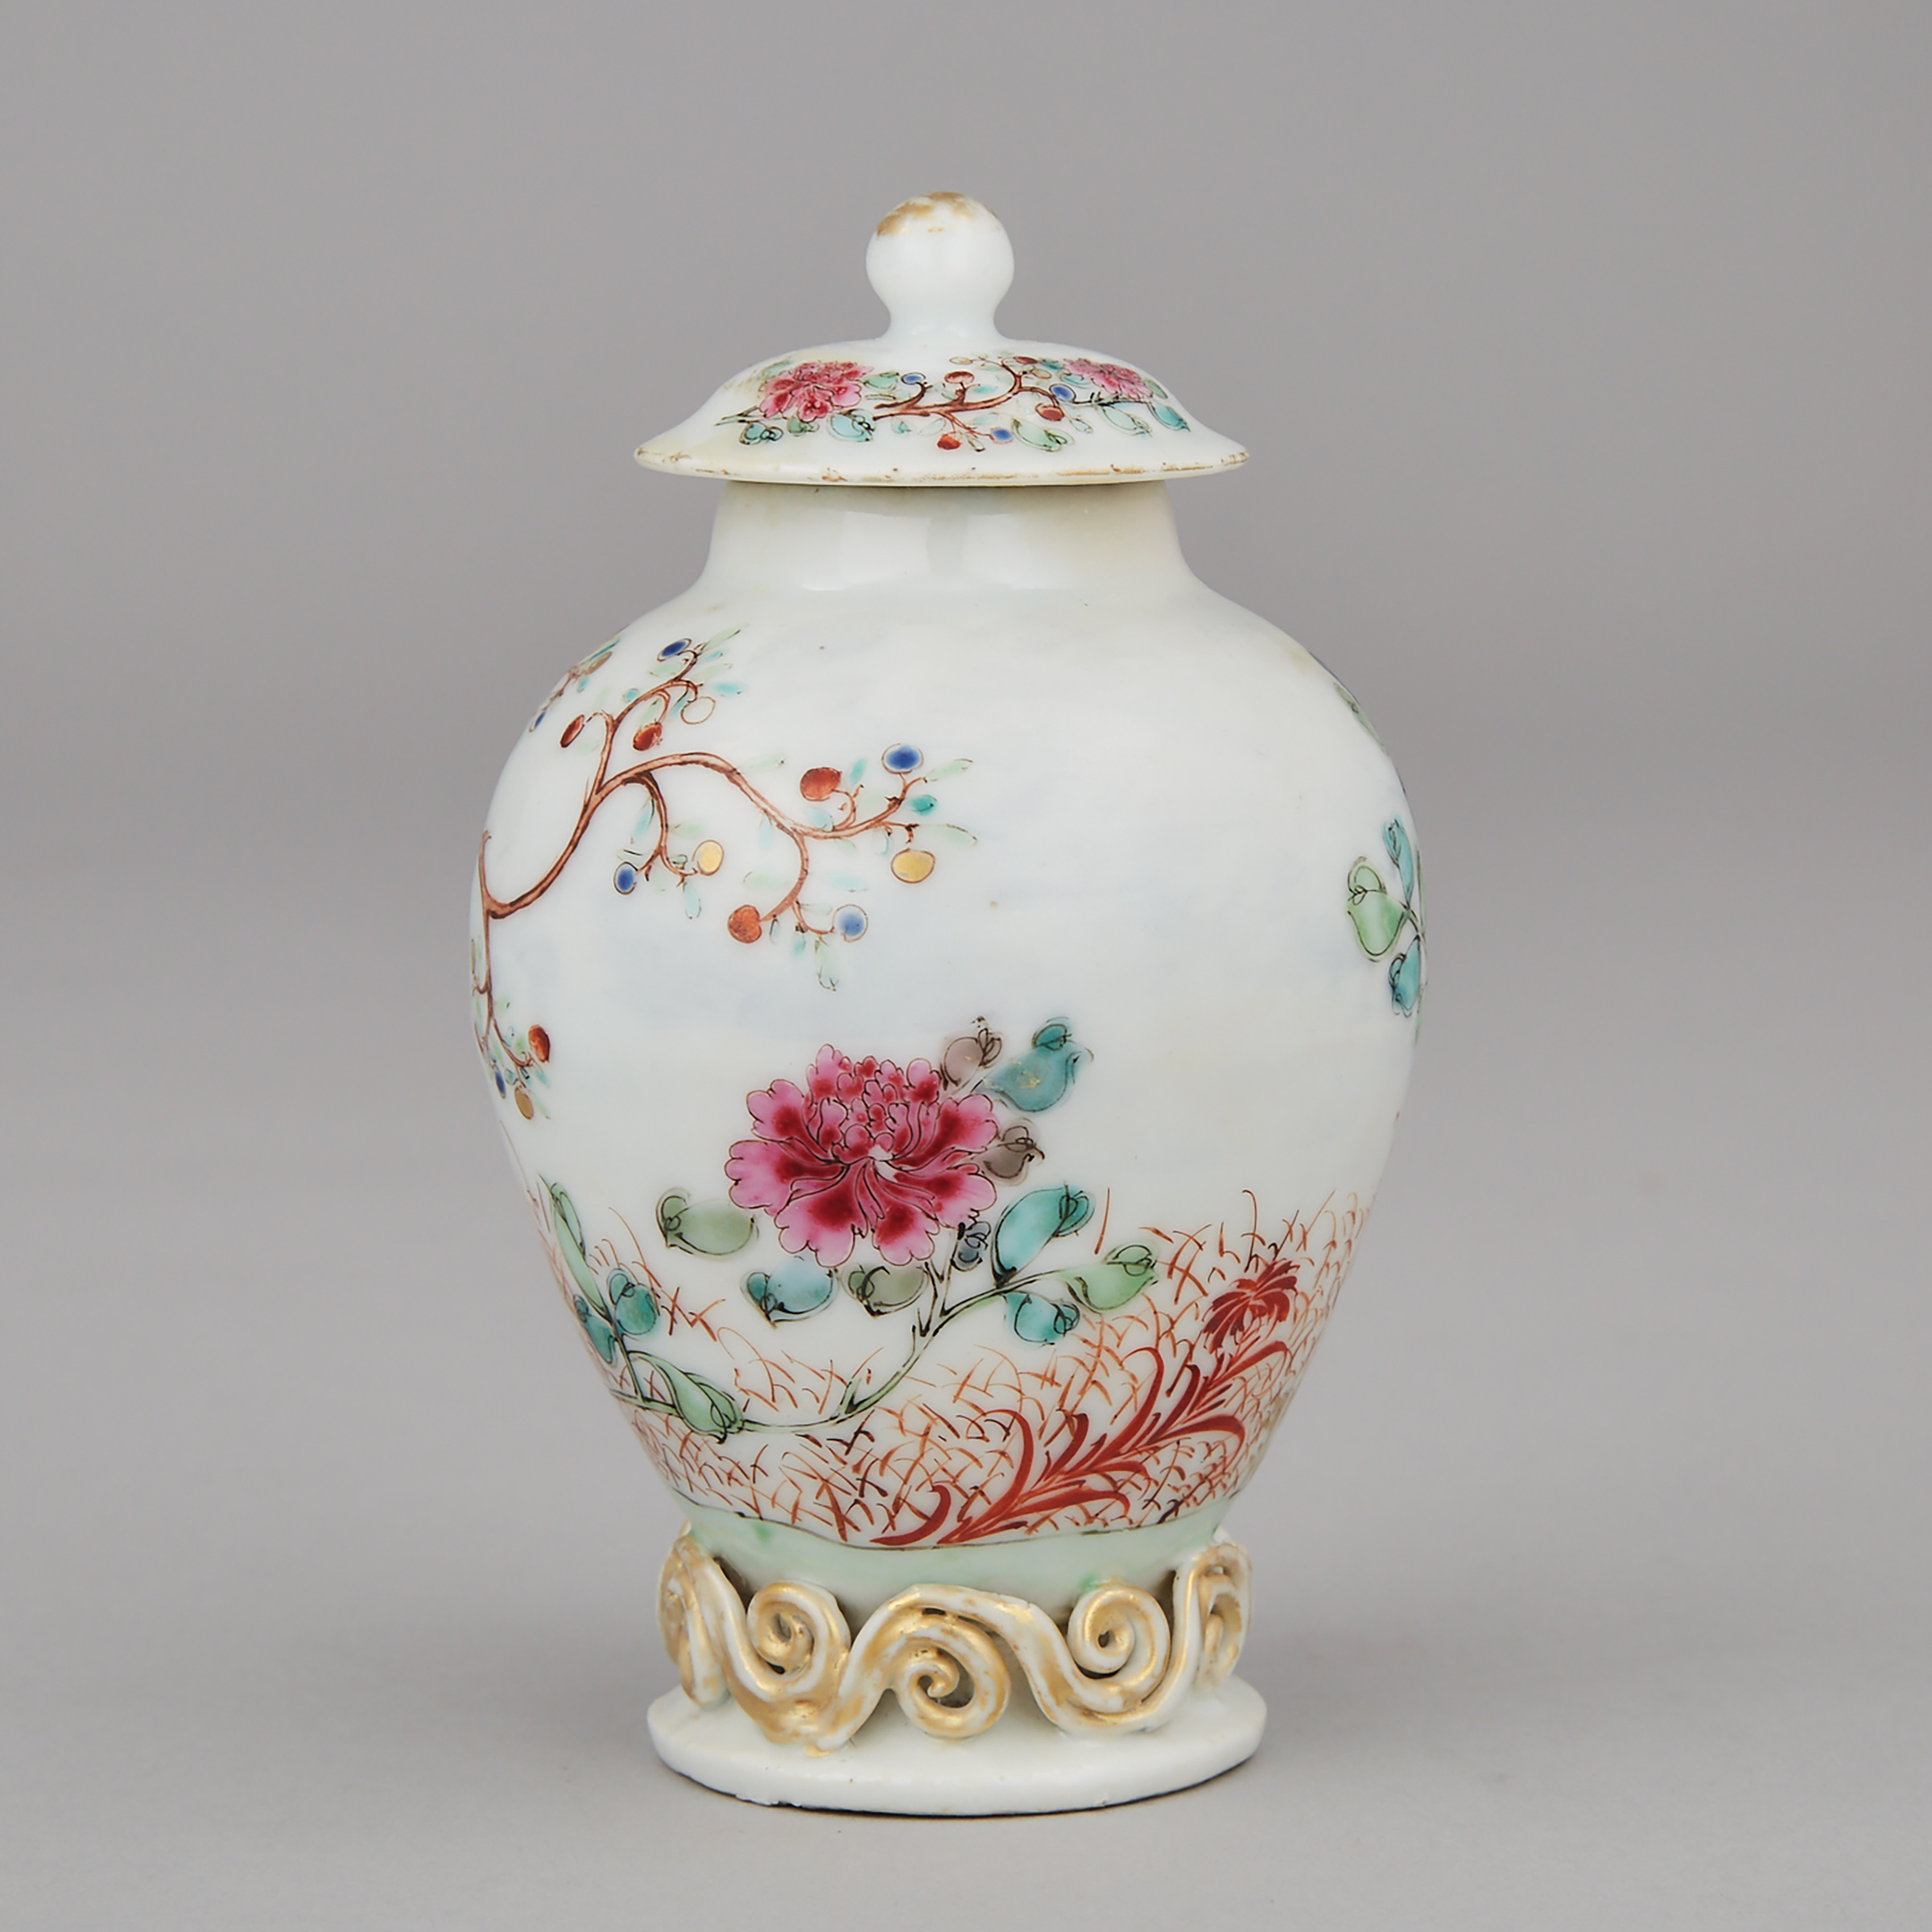 Chinese Export Porcelain Tea Canister, c.1780